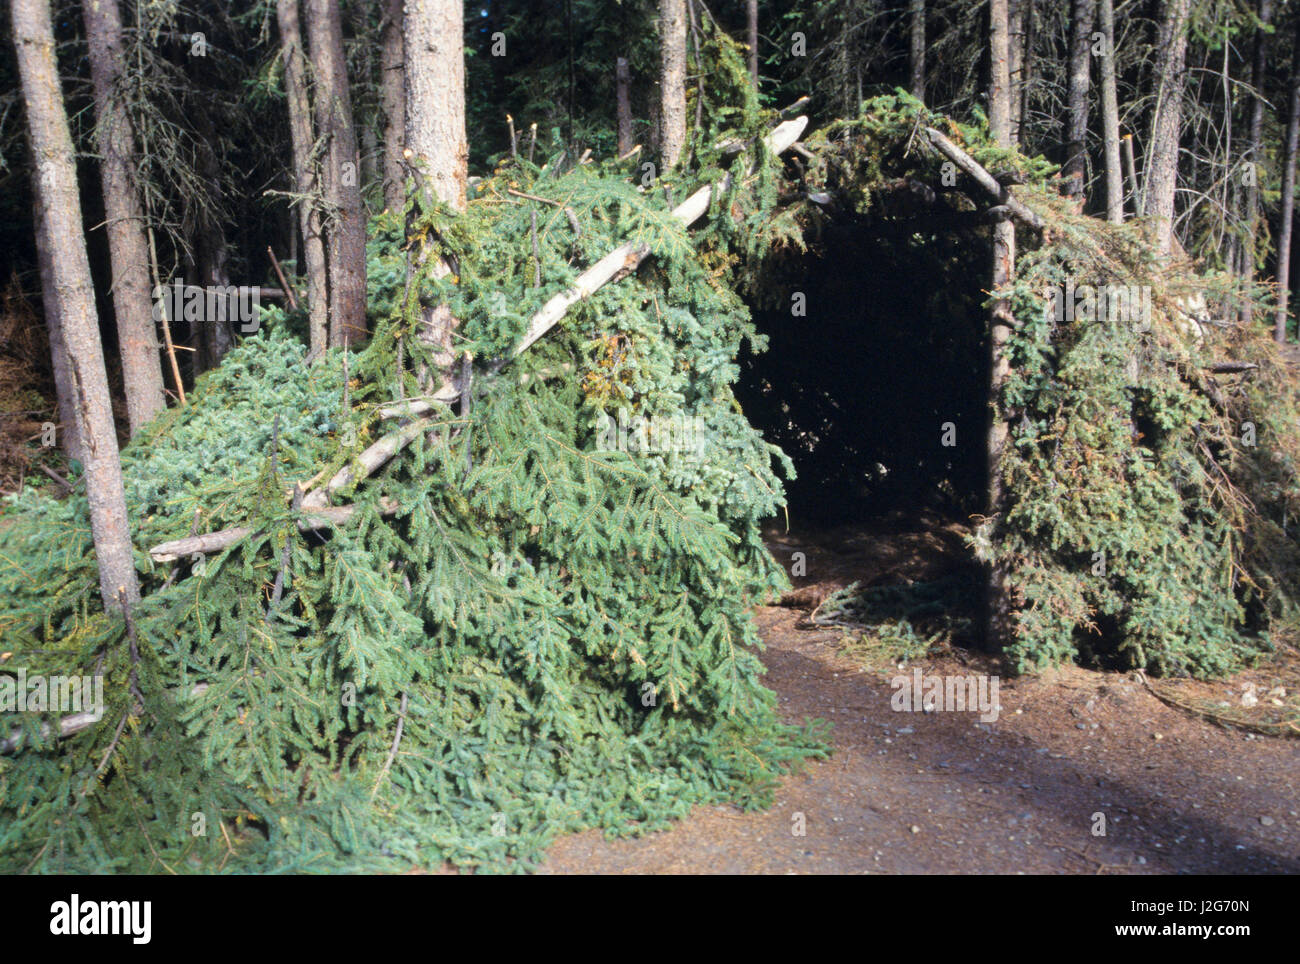 Traditional Athabaskan temporary dwelling covered with tree branches called a wickiup used during hunts or at fishing camp. Chena Village, Alaska (PR) Stock Photo